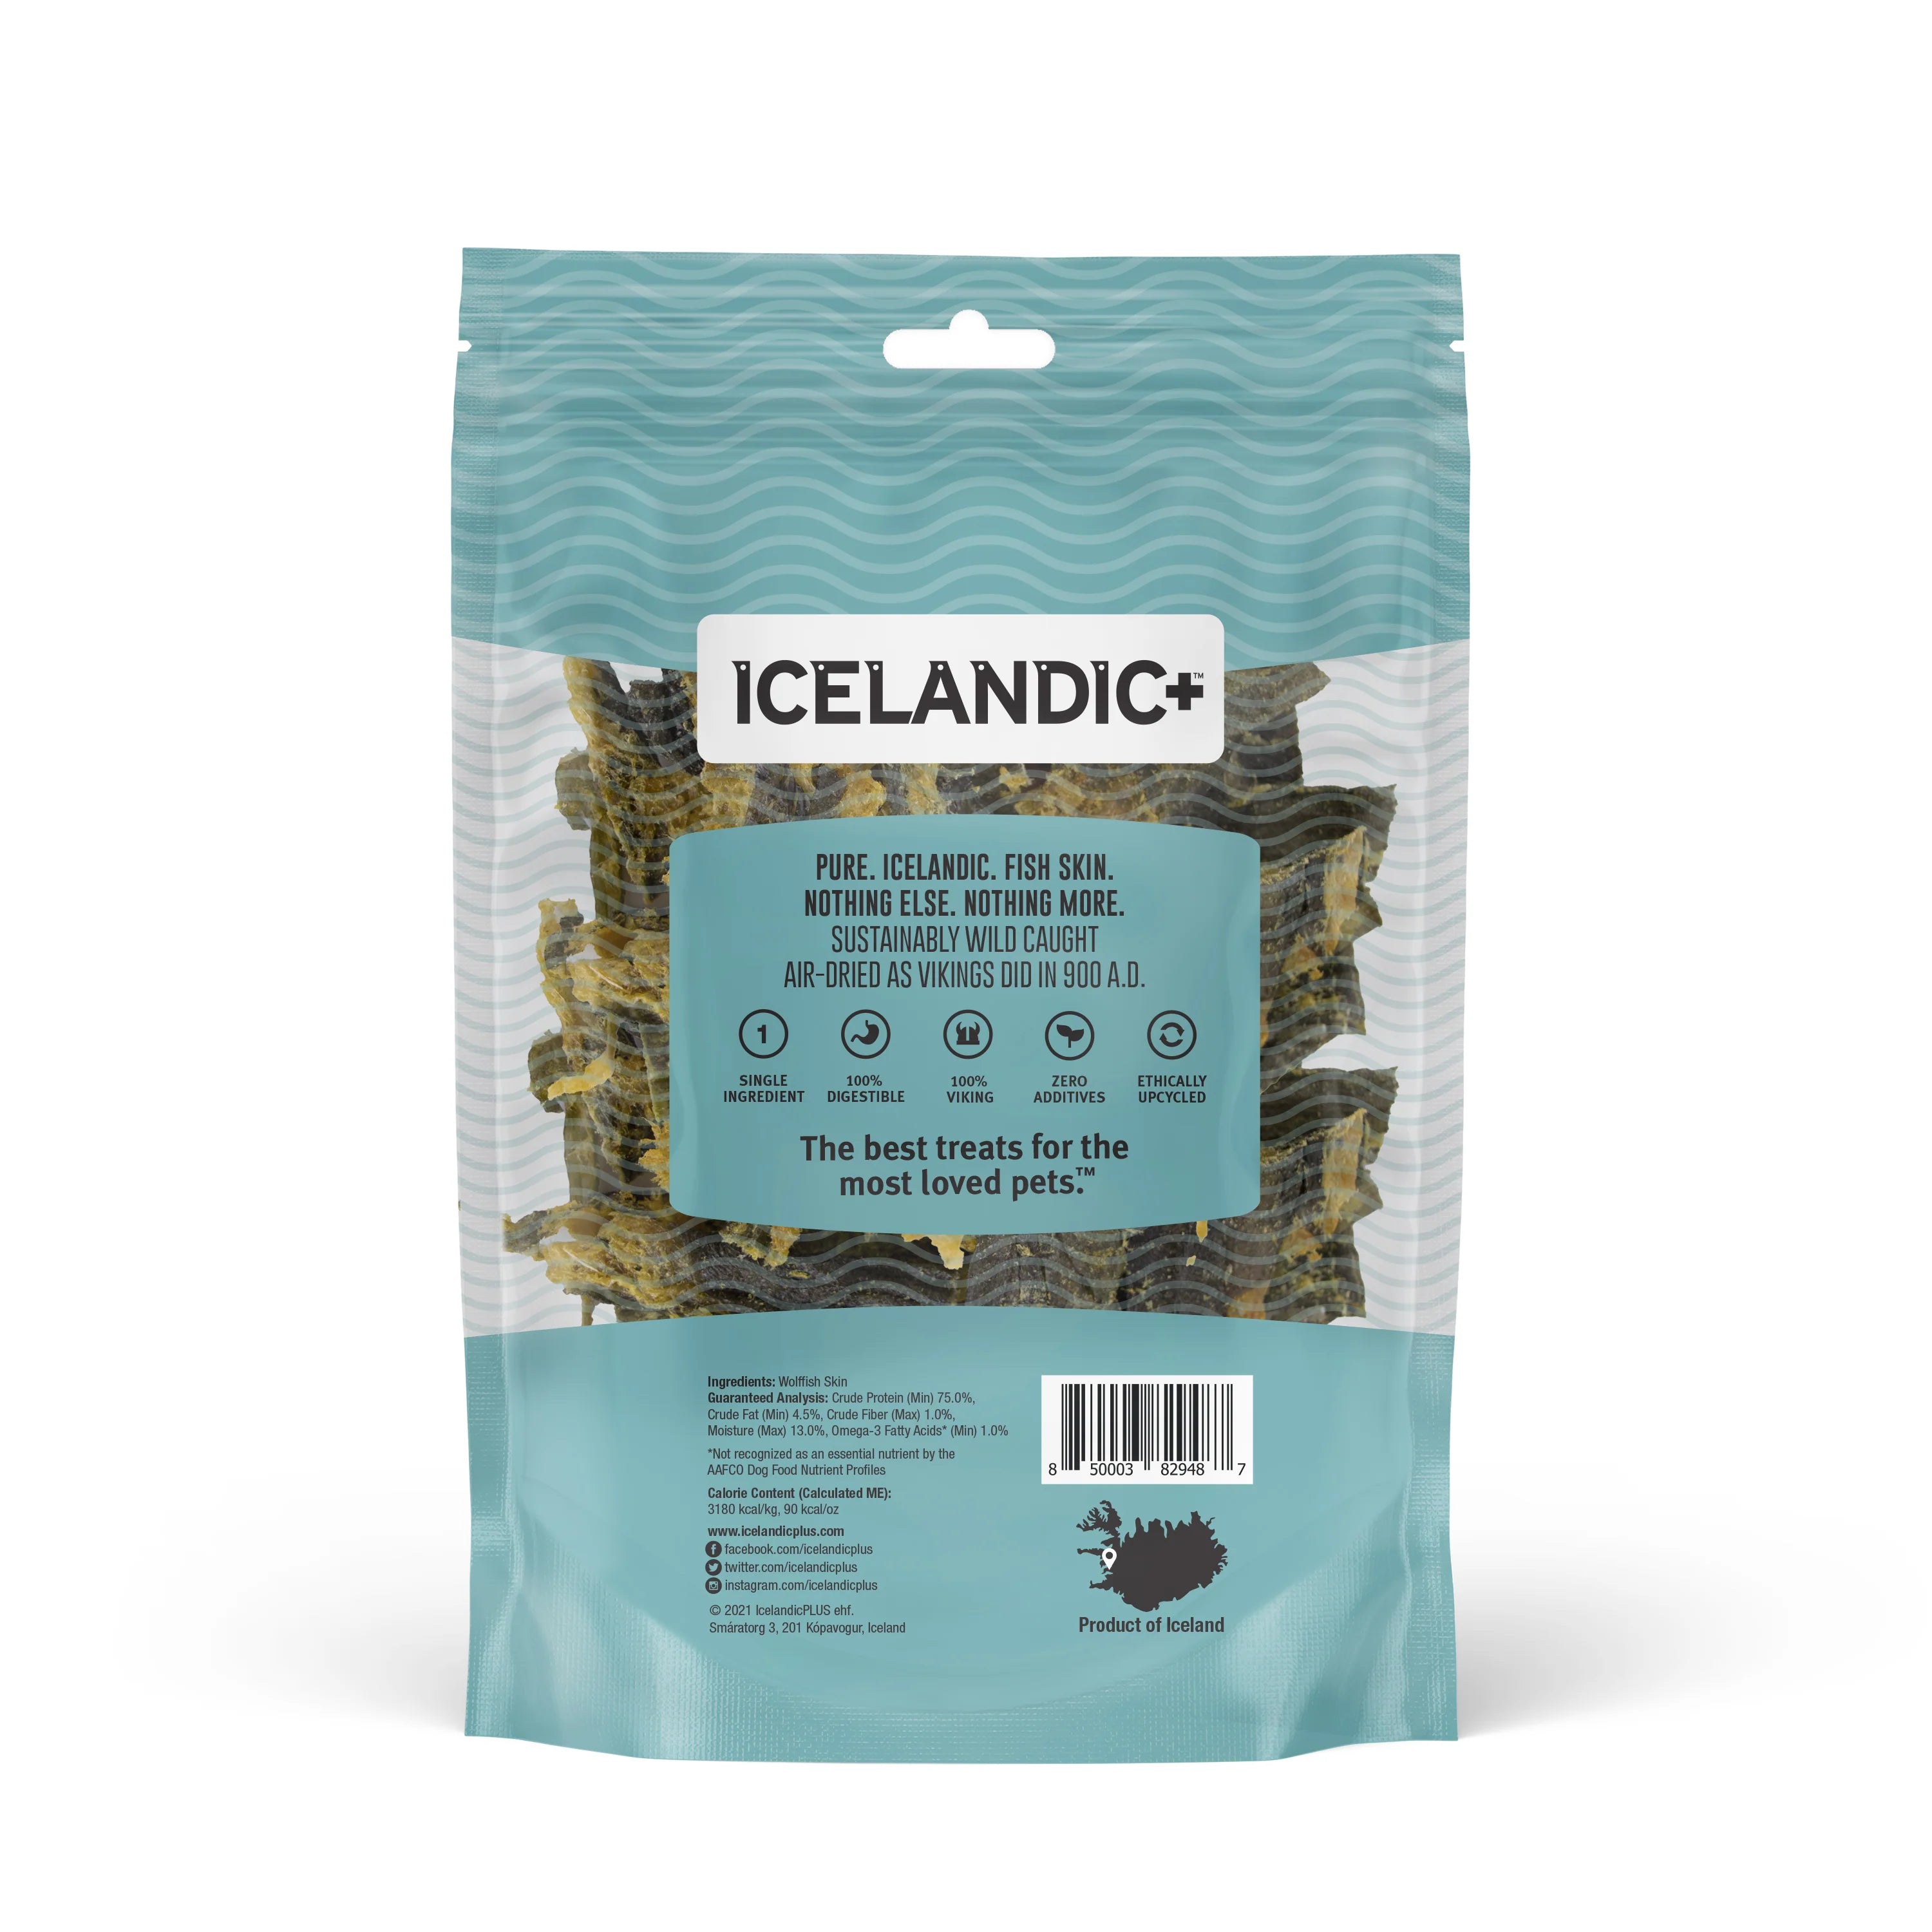 Icelandic+ Wolffish chews are sustainably wild-caught, 100% natural, and free of additives or preservatives. Wolffish skin is very dense, making it a great alternative and nutritious chew that dogs find irresistible.